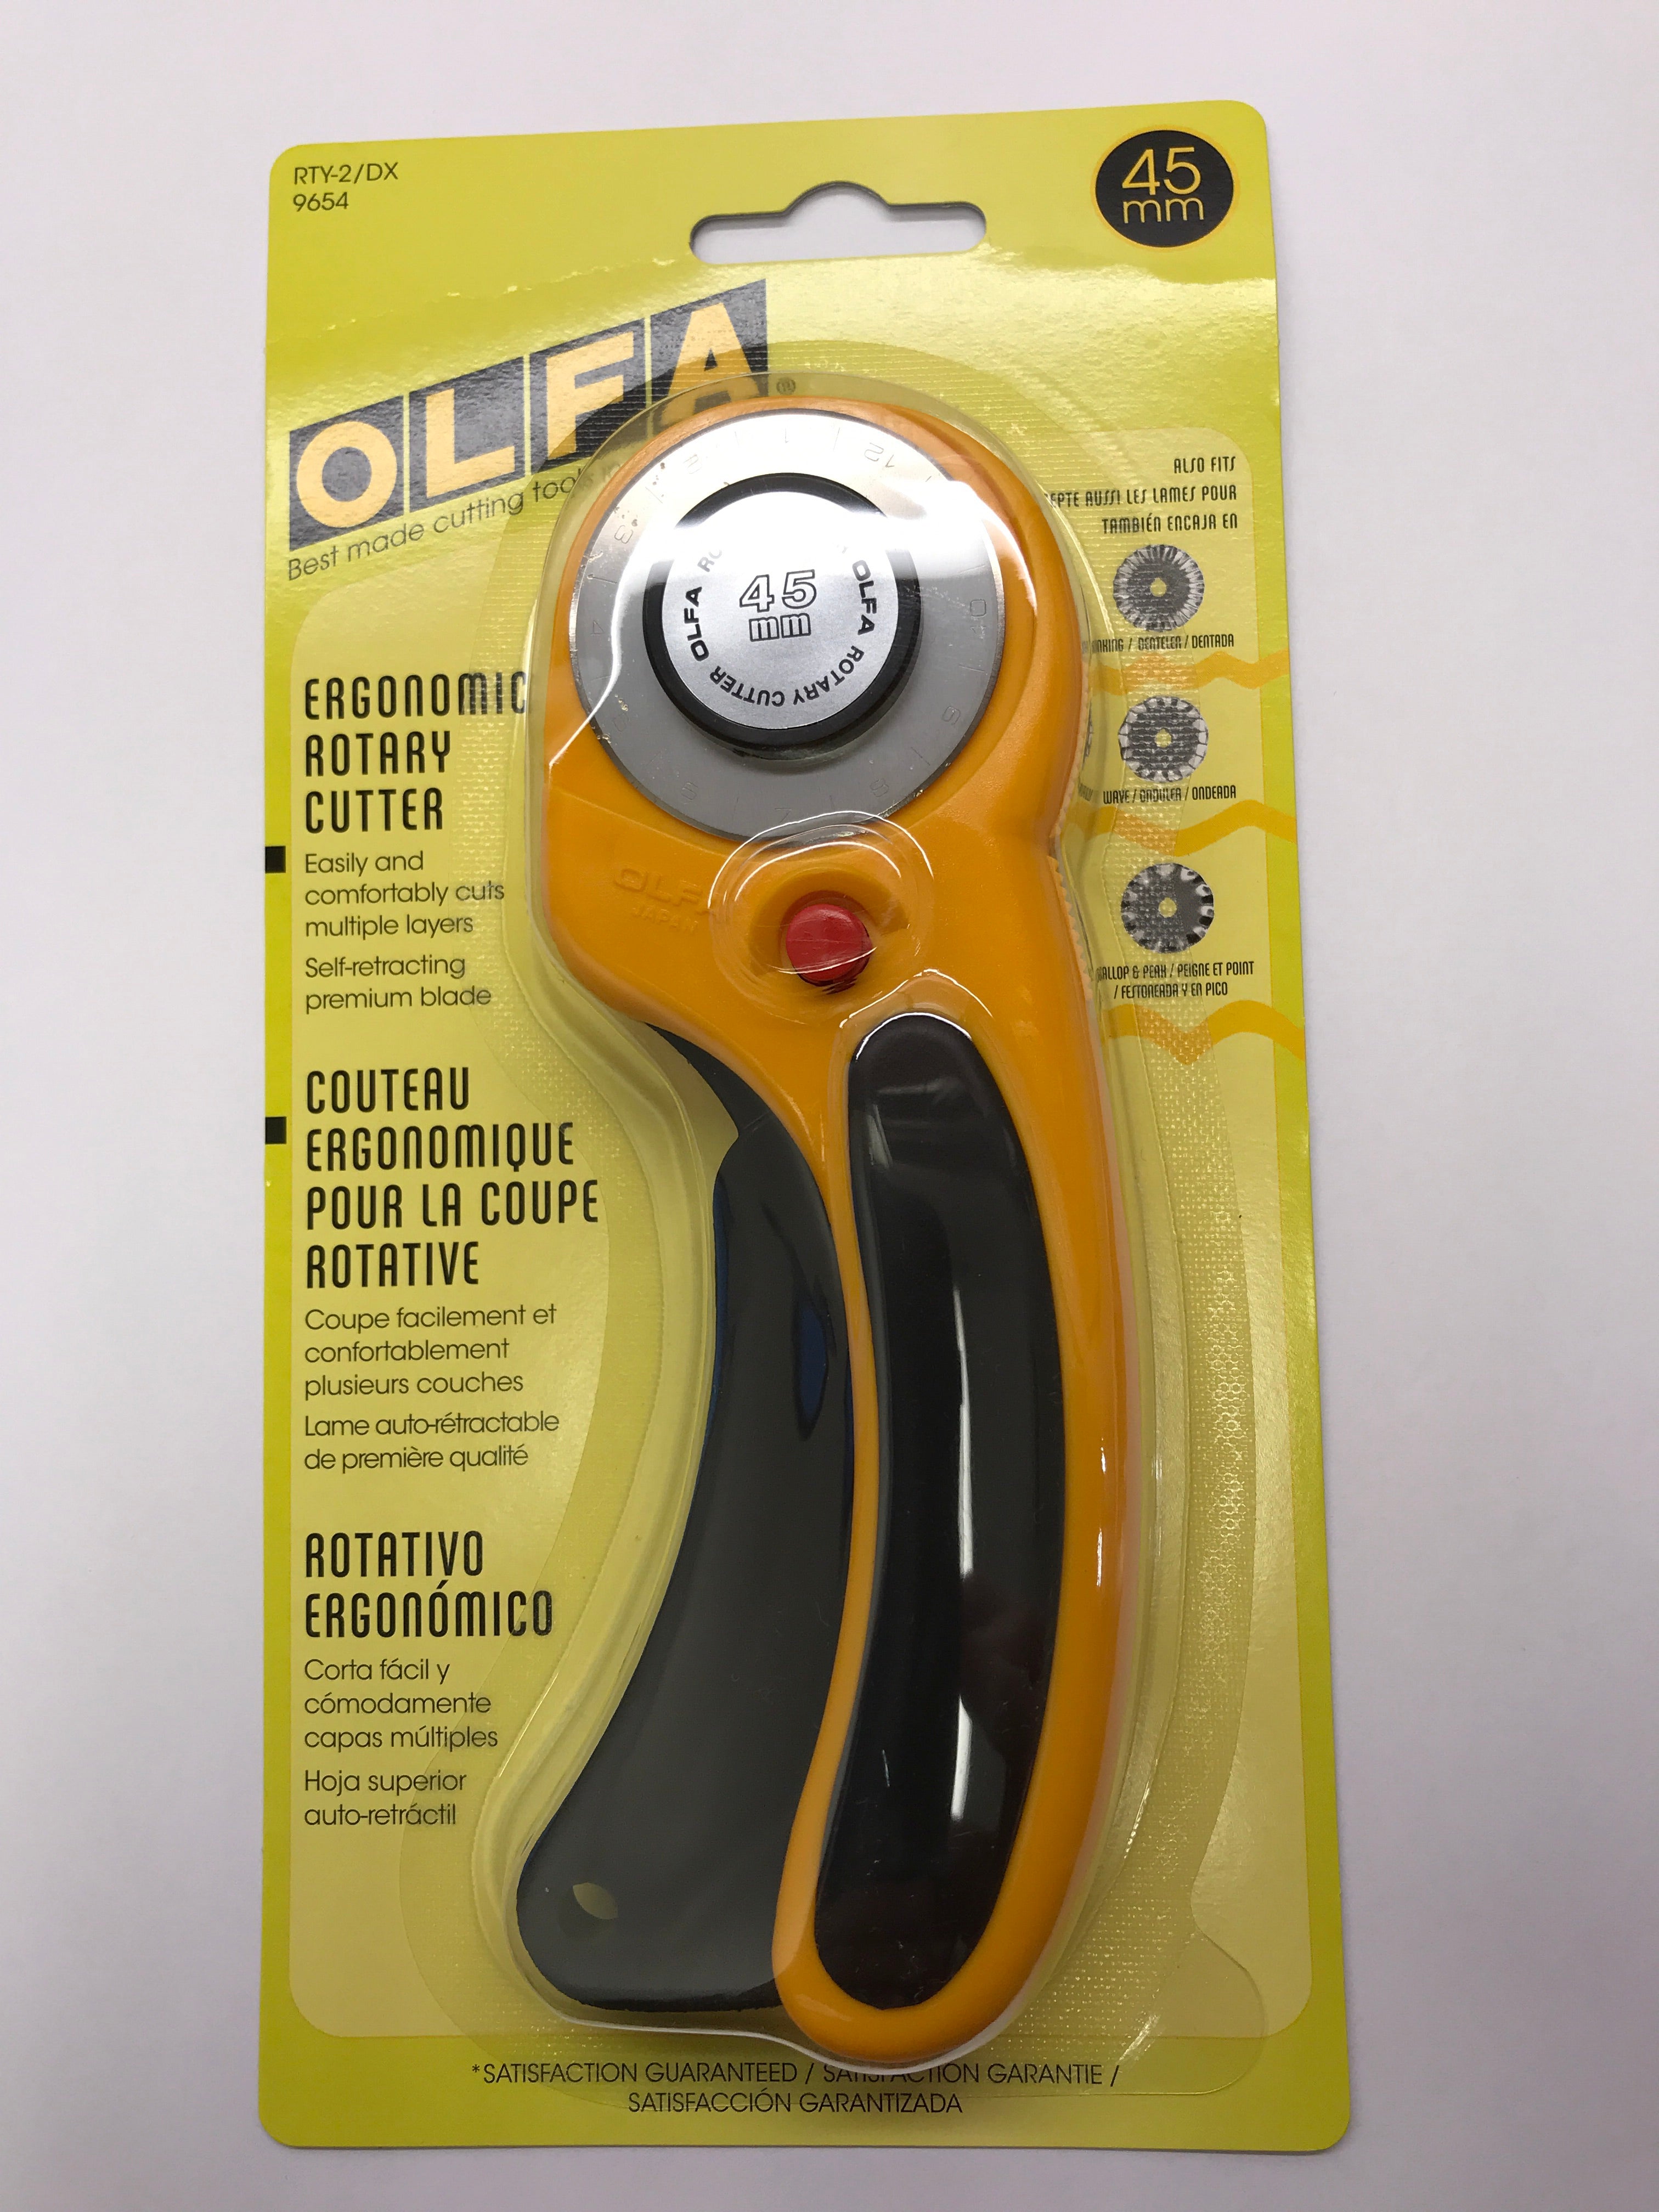 Olfa Deluxe Ergonomic Rotary Cutter - 45 mm - RTY-2/DX 9654